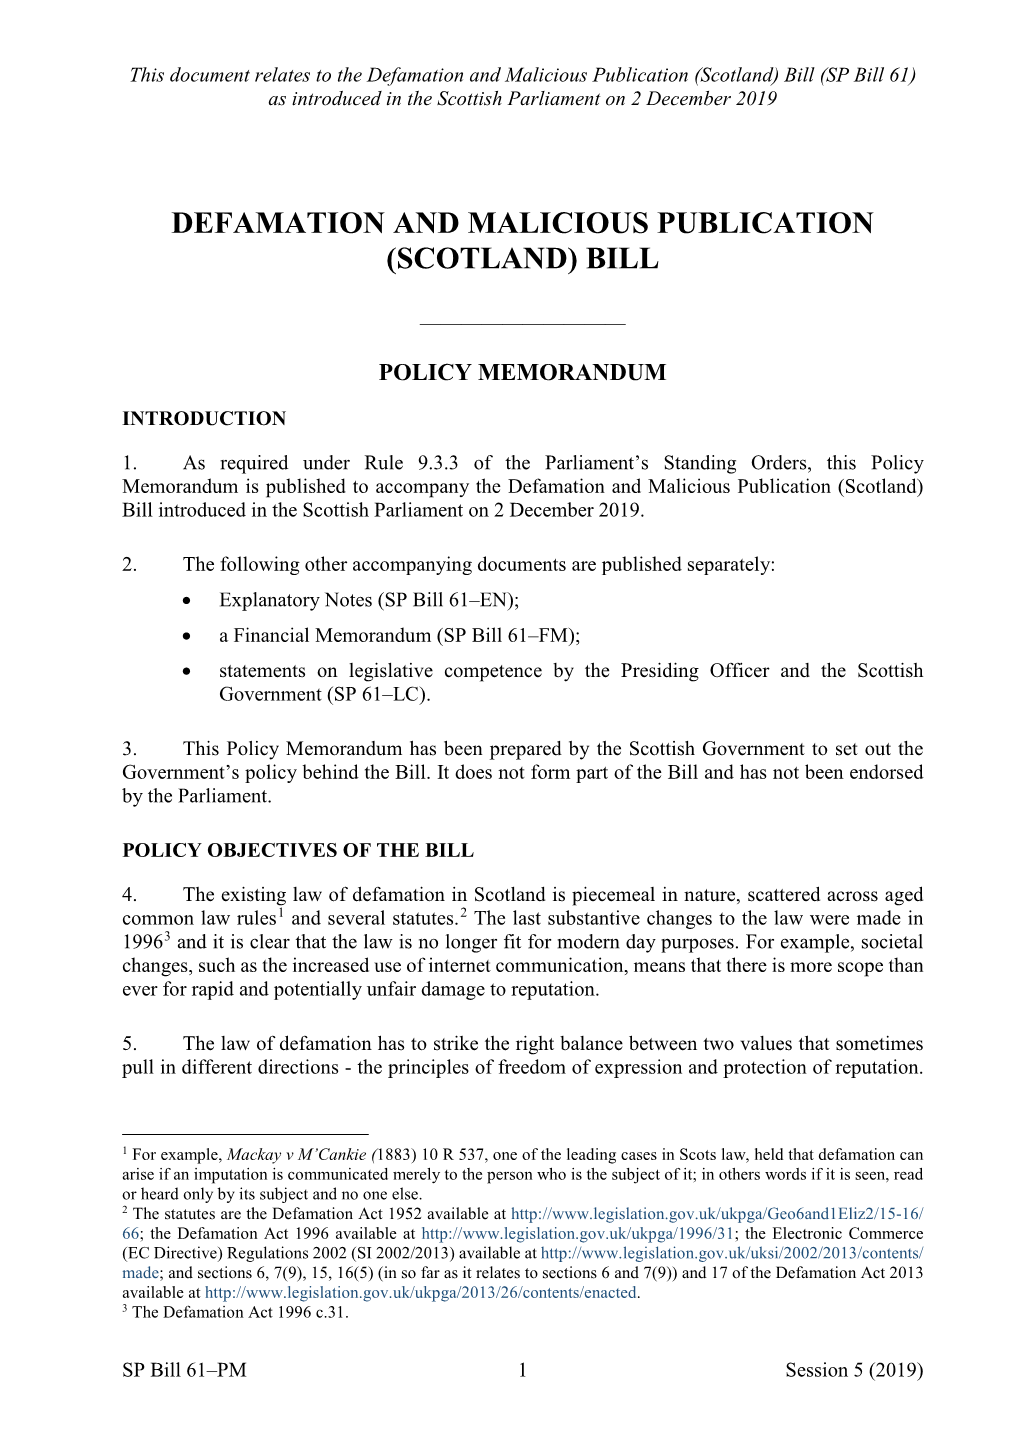 Defamation and Malicious Publication (Scotland) Bill (SP Bill 61) As Introduced in the Scottish Parliament on 2 December 2019